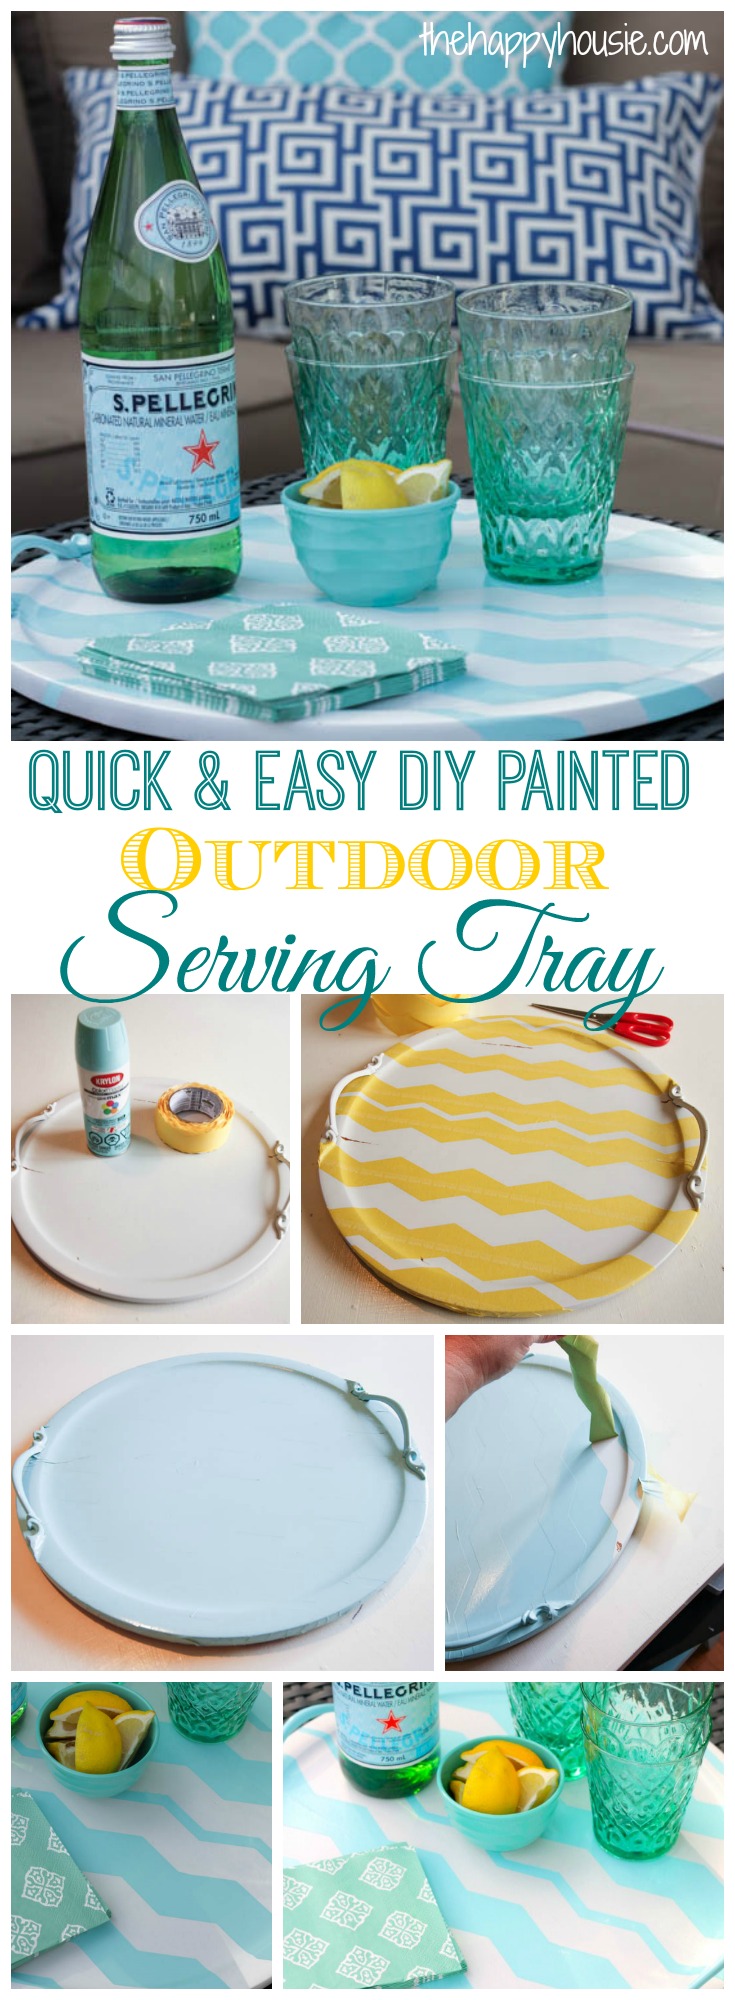 a quick and easy way to add some color to your outdoor decor with this quick and easy DIY painted outdoor Serving Tray at thehappyhousie.com